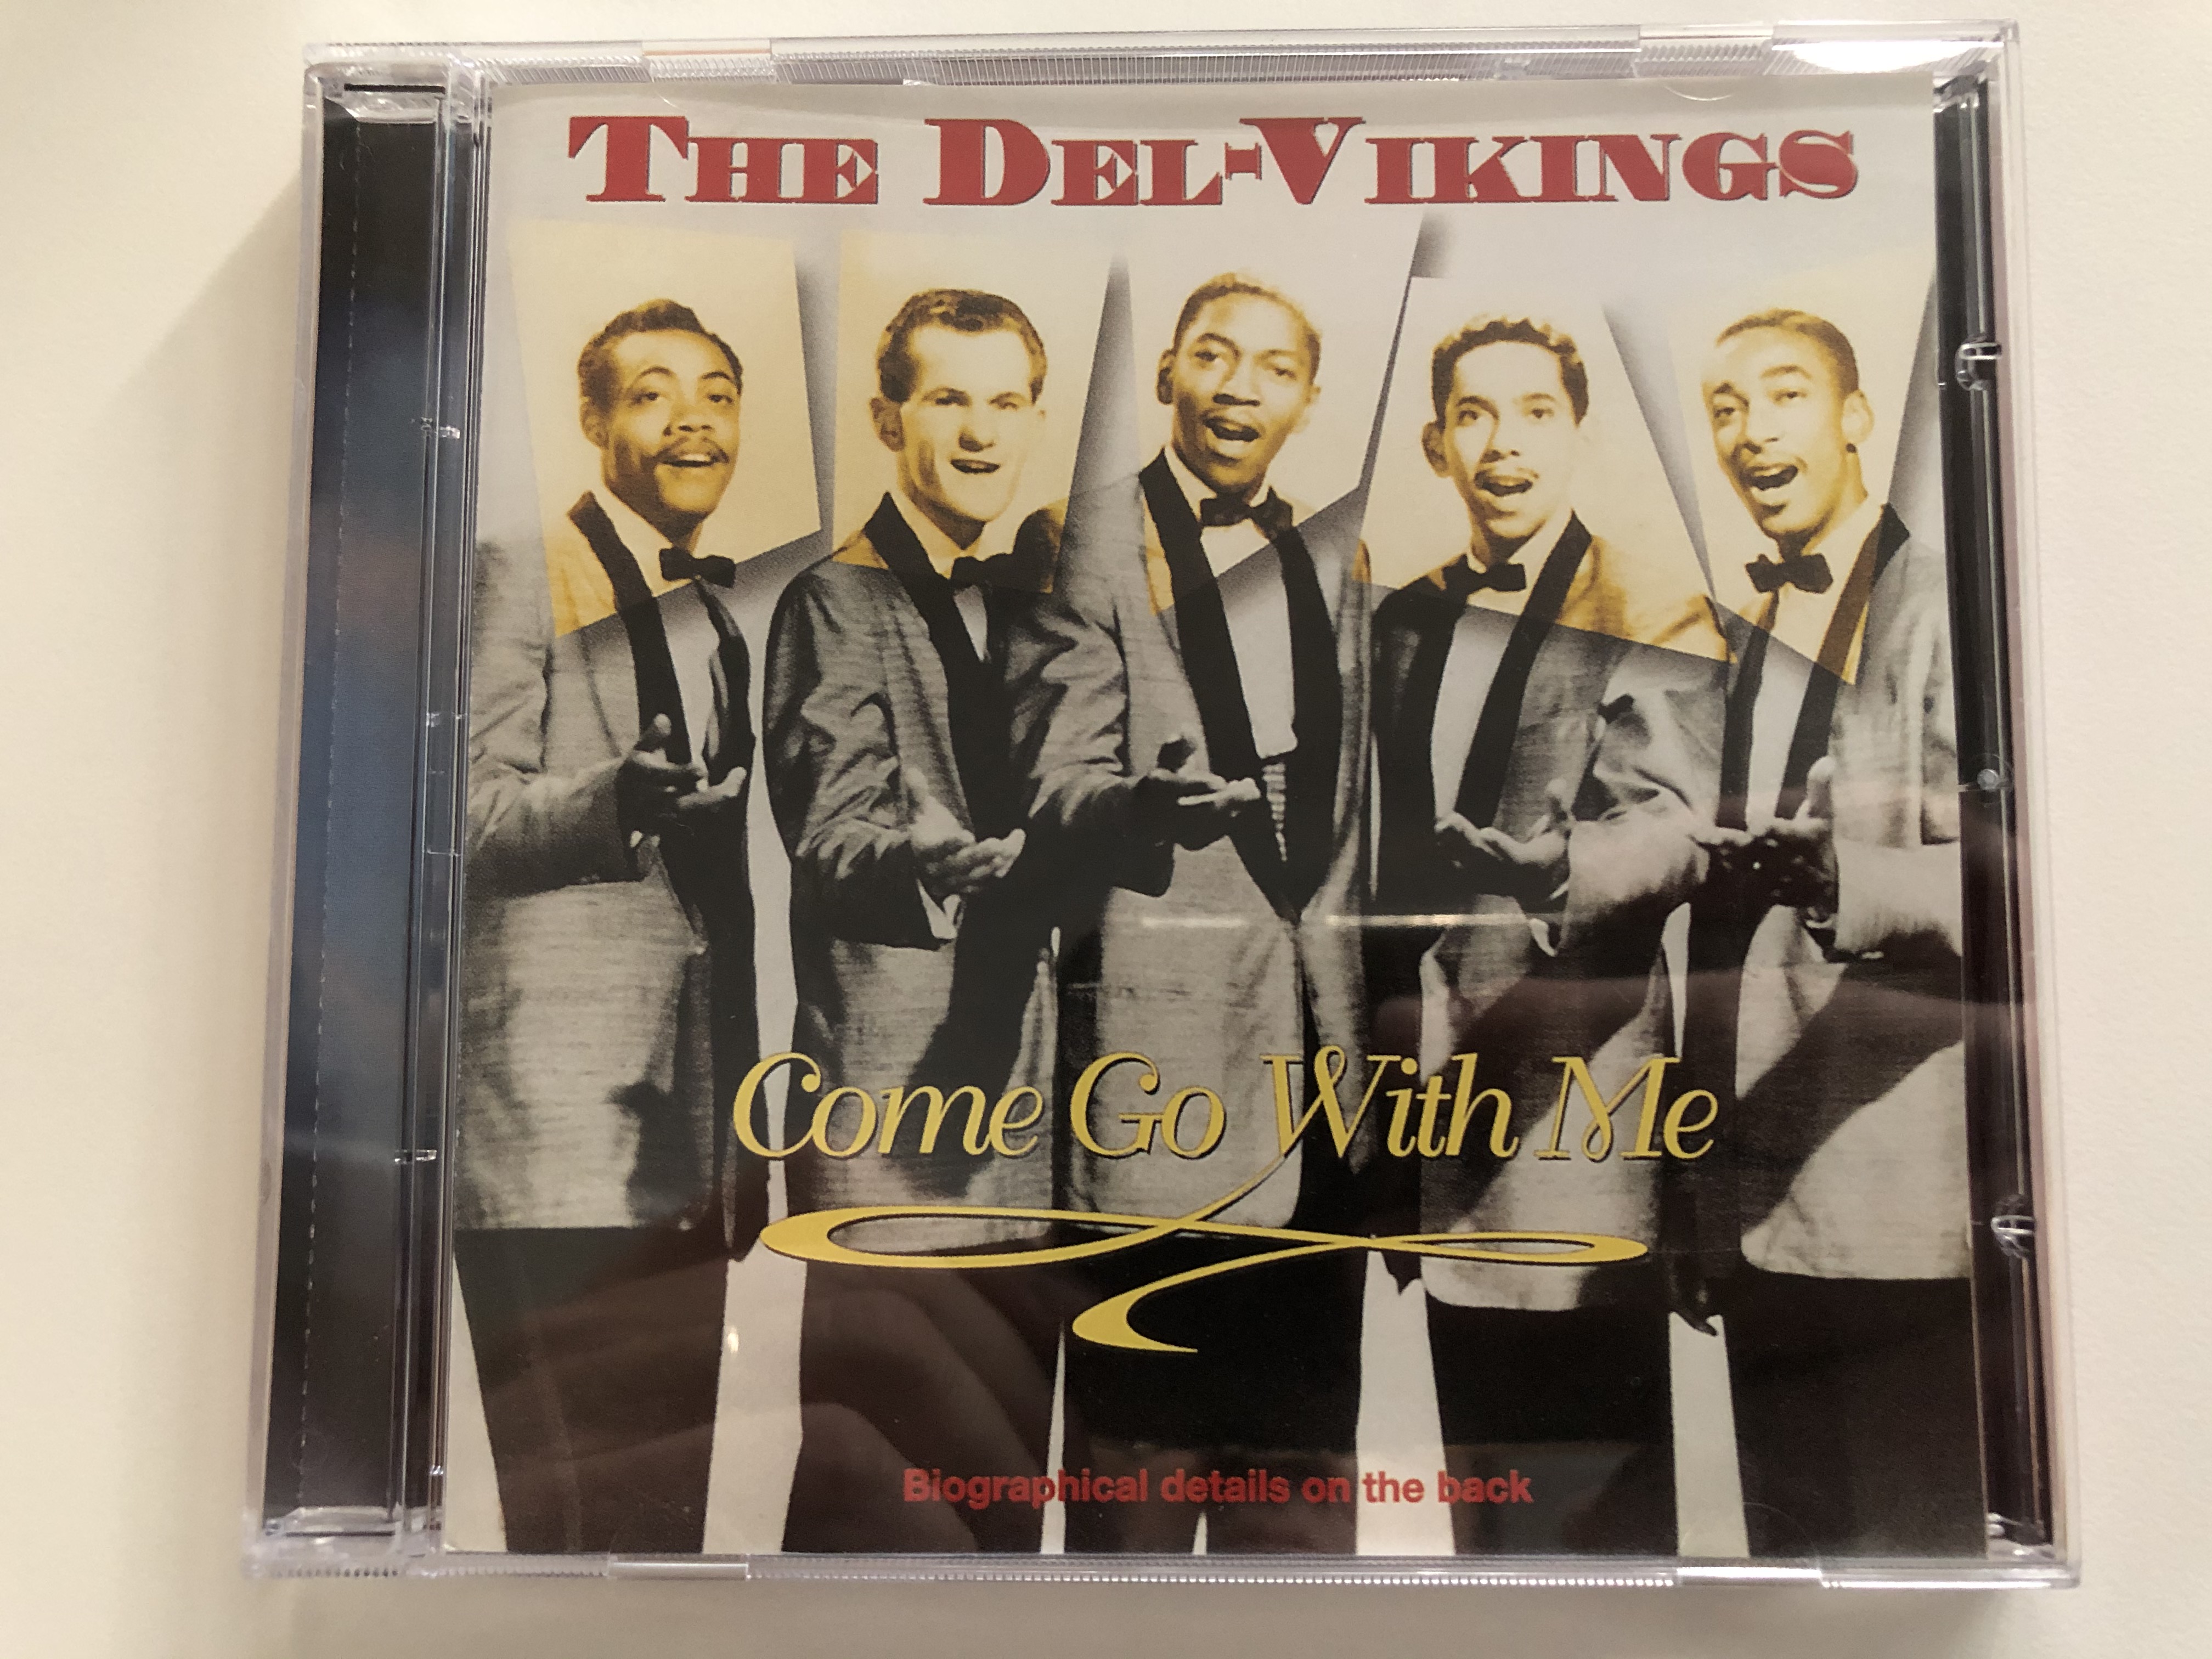 the-dell-vikings-come-go-with-me-biographical-details-on-the-back-elap-music-audio-cd-1996-16275-cd-1-.jpg